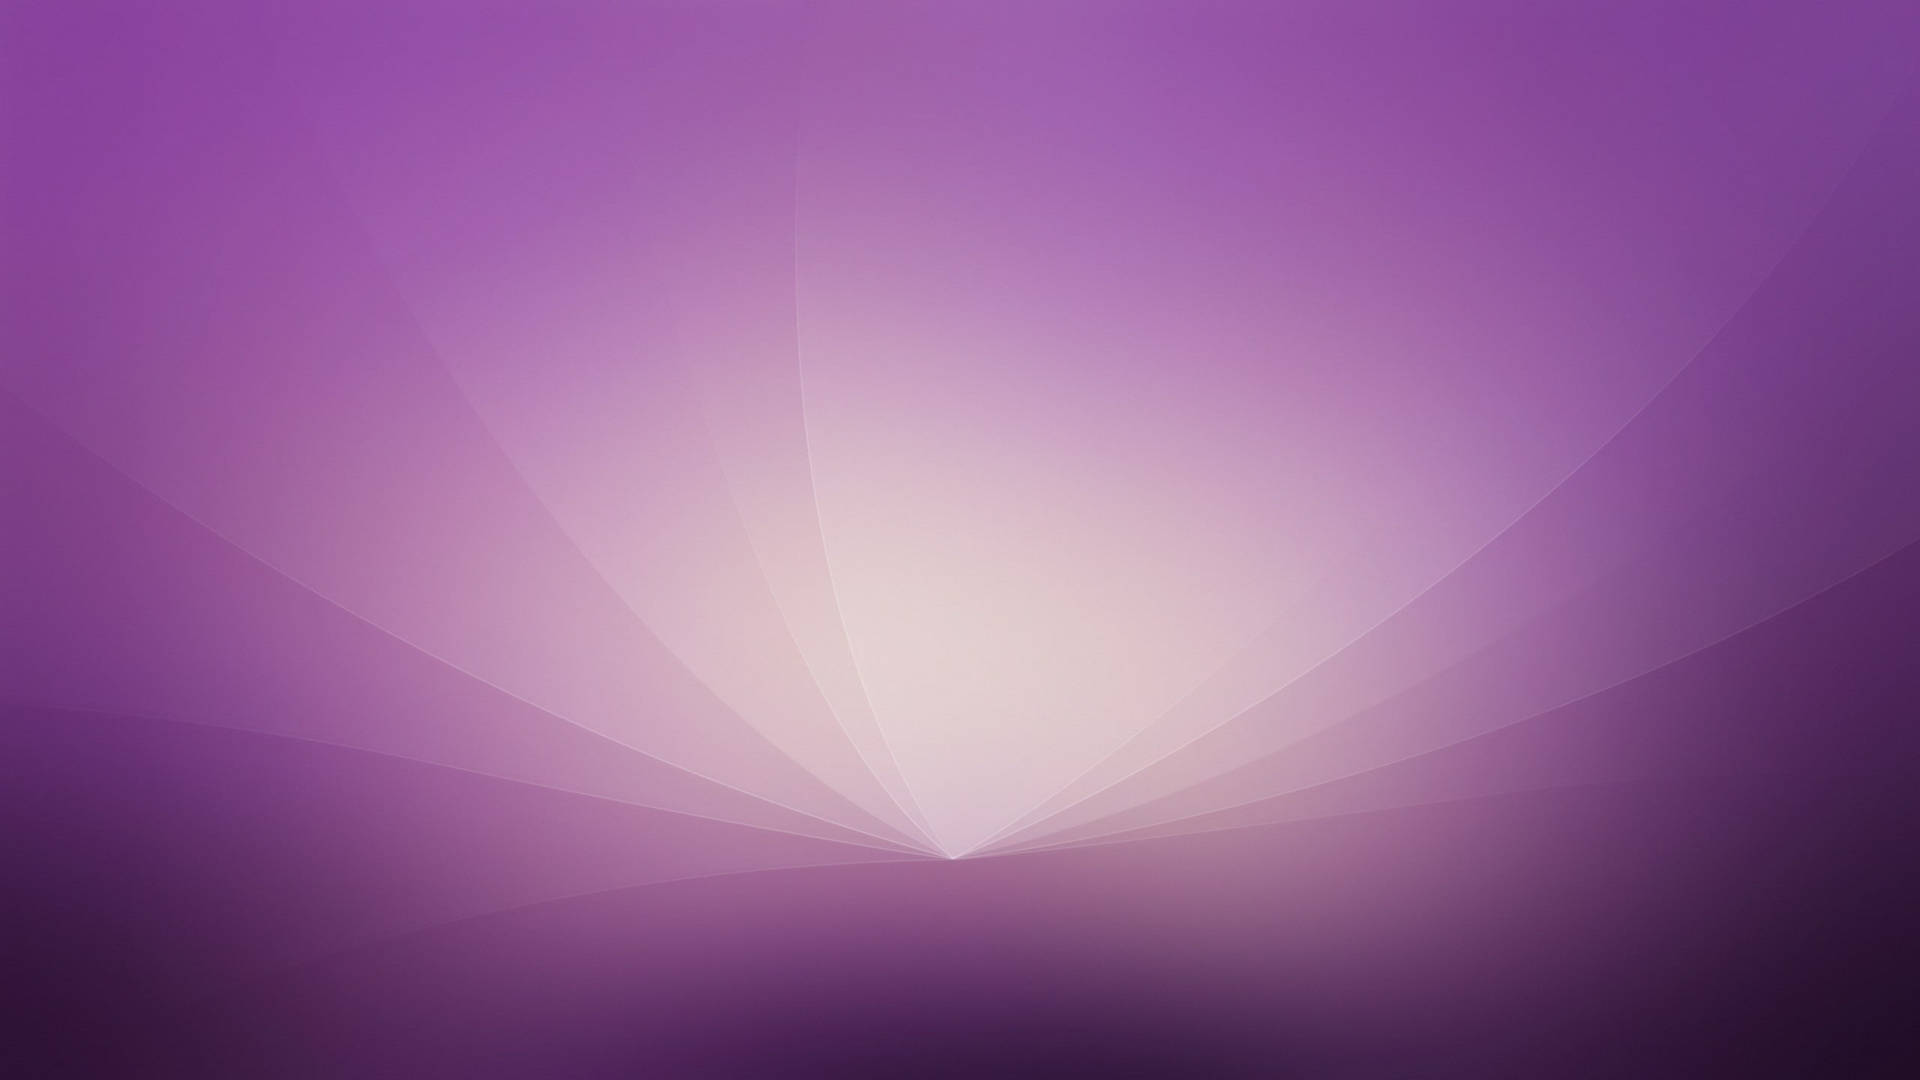 Violet Aesthetic Simple Clean Abstract Background